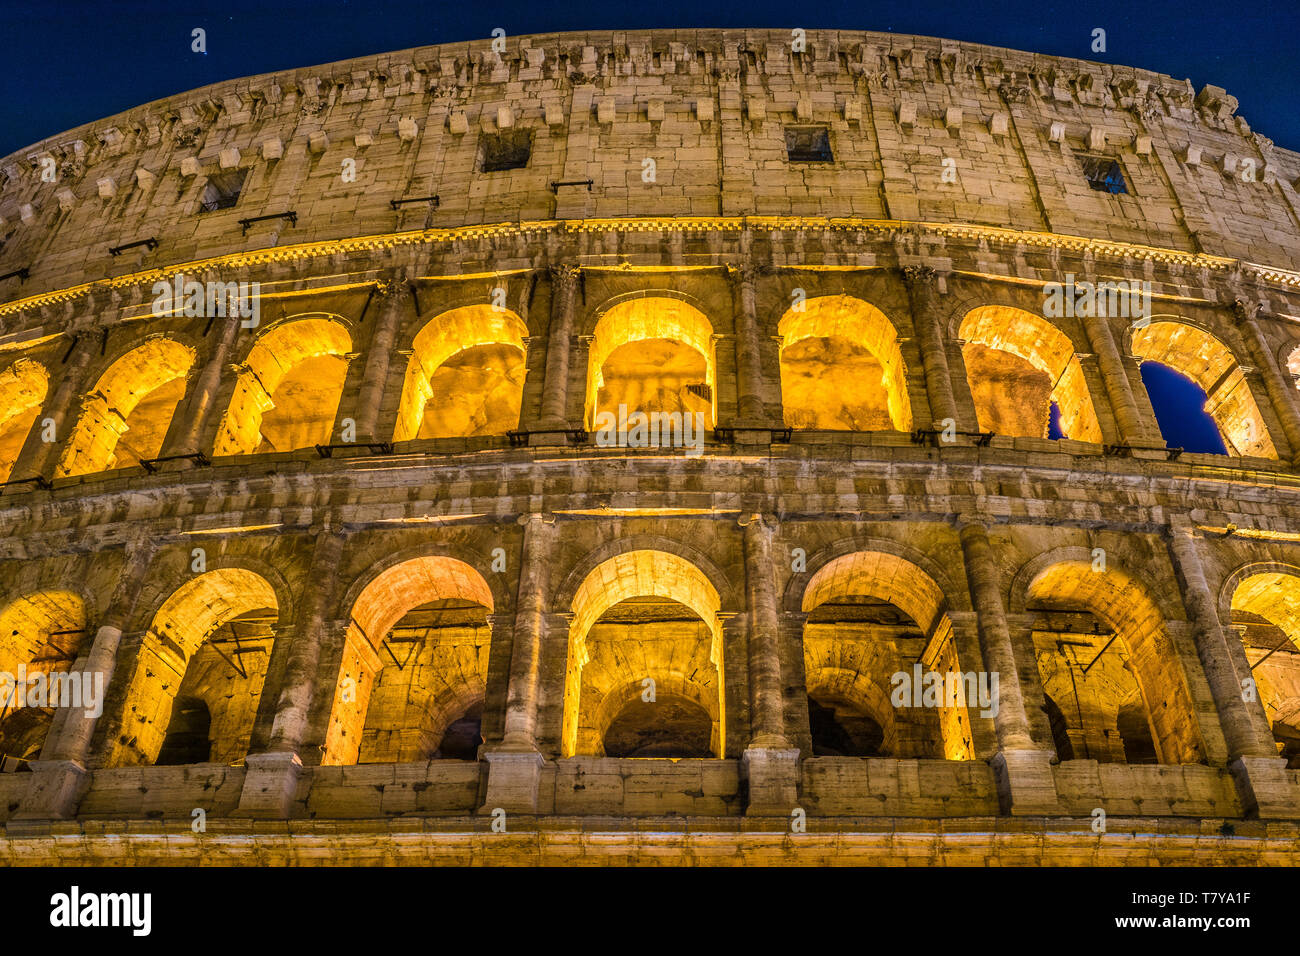 The Great Roman Colosseum and its arches at night in Rome - Italy Stock Photo